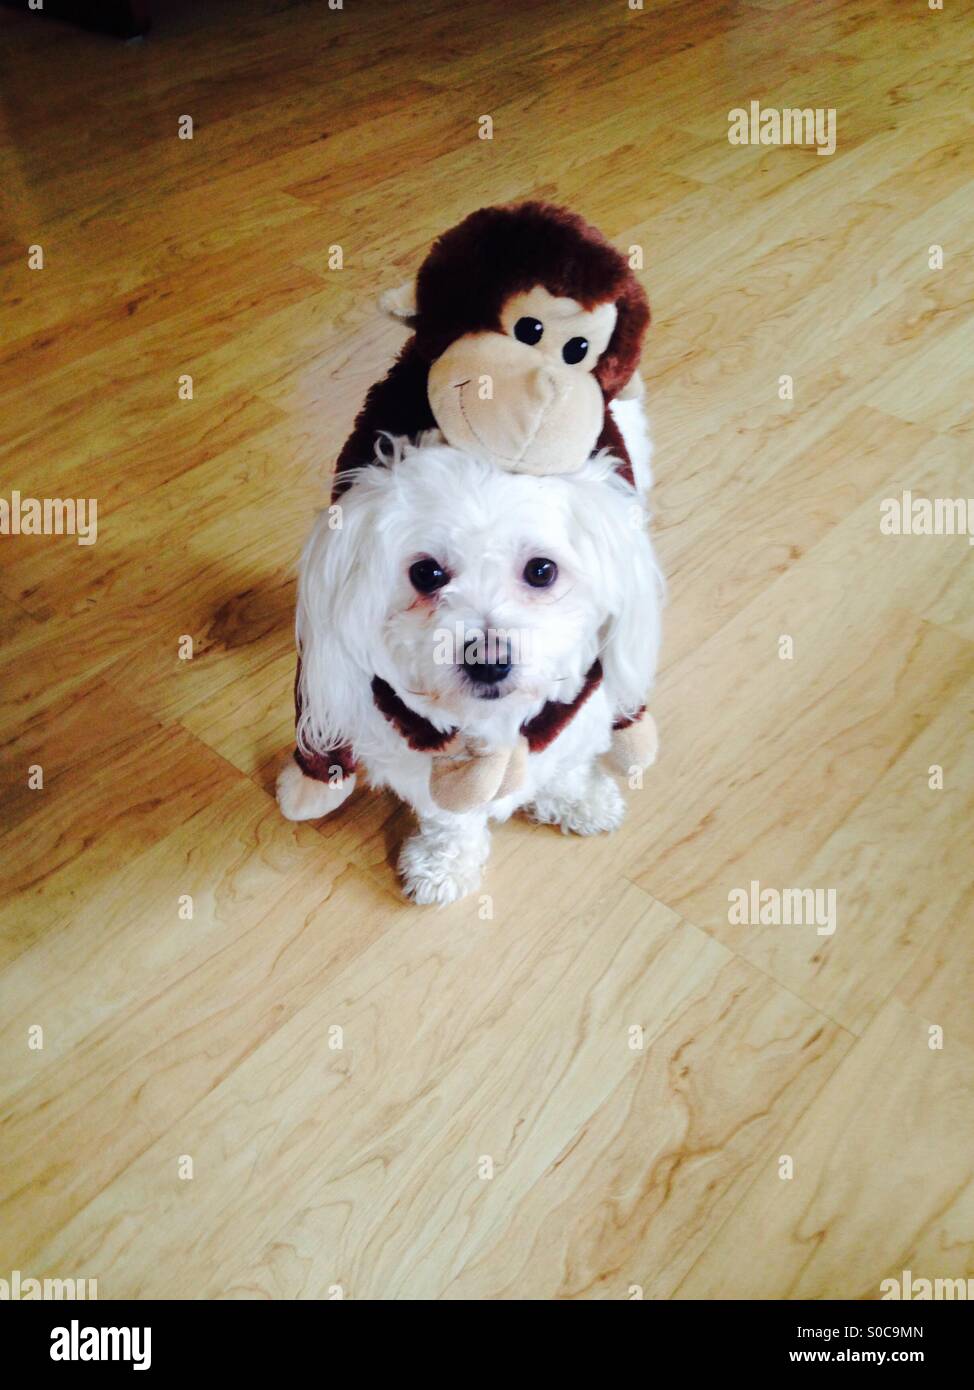 A small white dog with a stuffed monkey on his back. Stock Photo